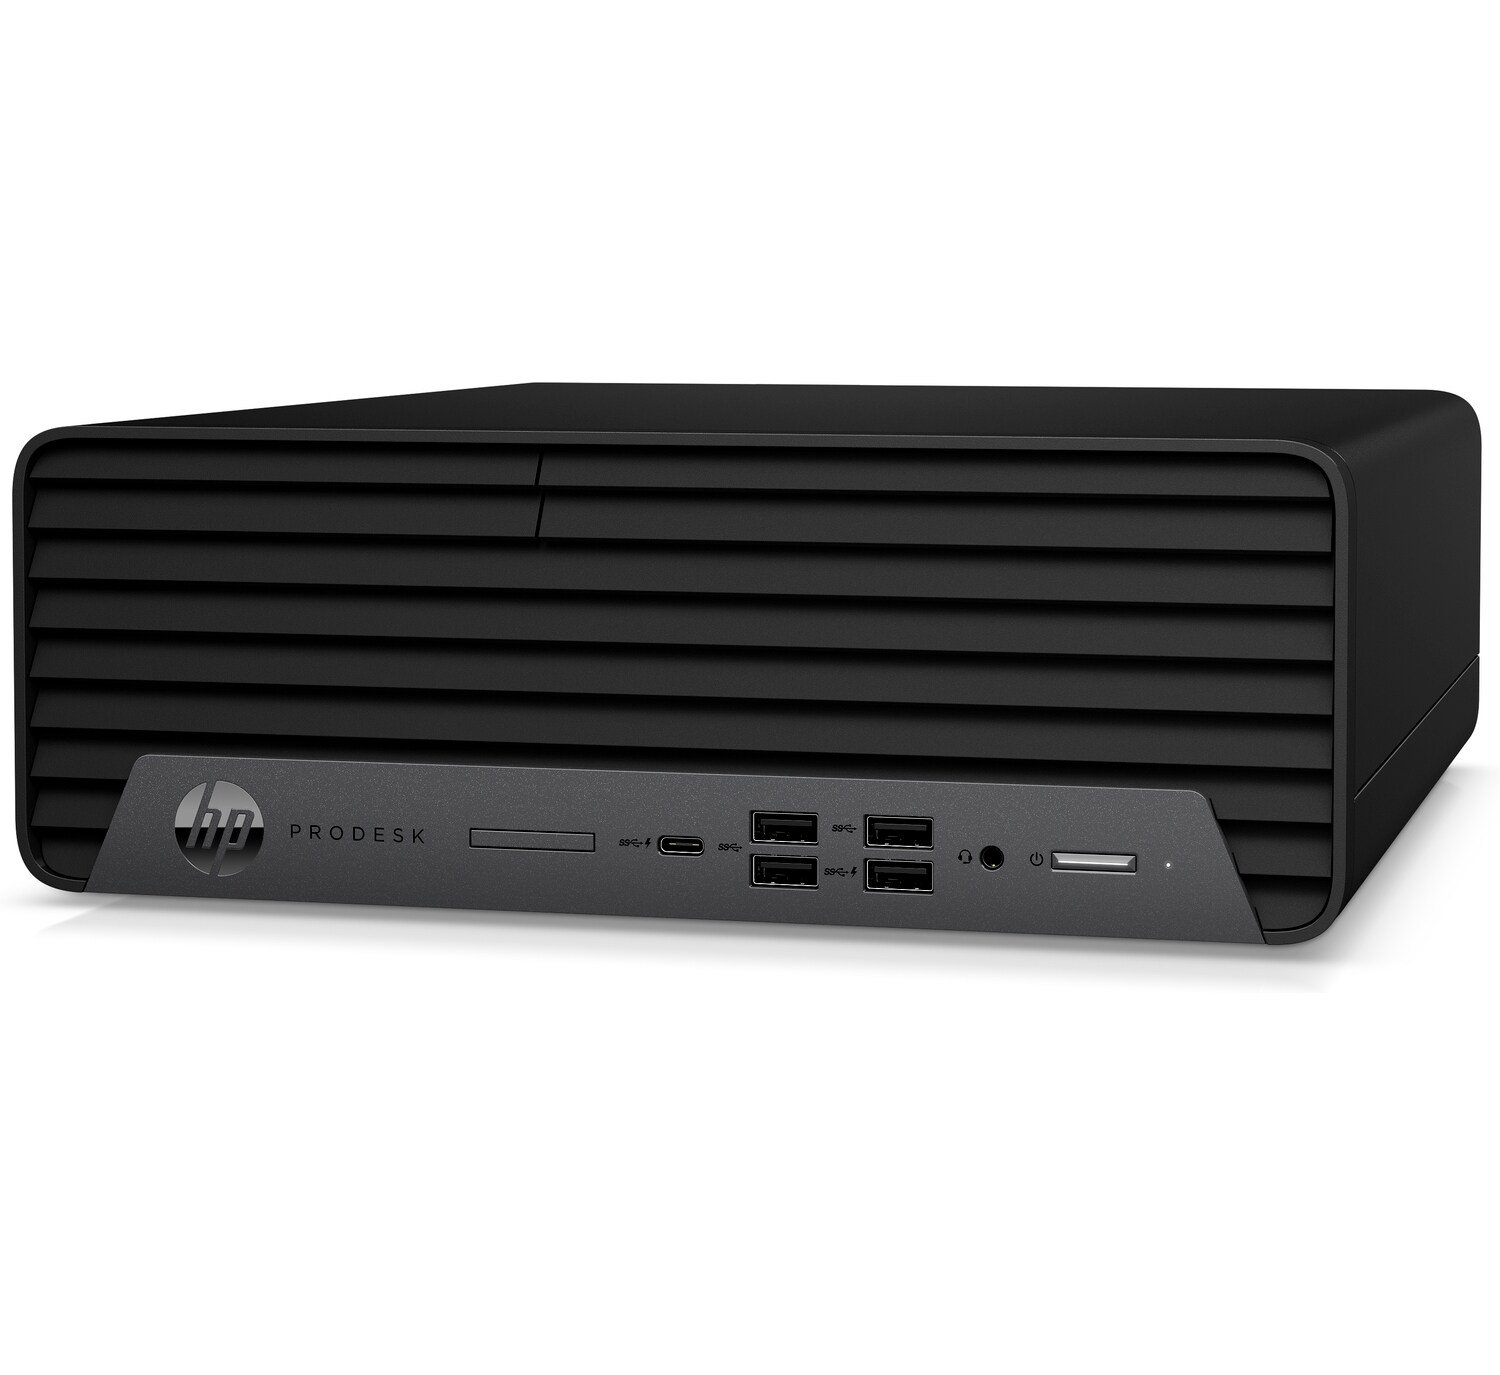 HP ProDesk 600 G6 SFF i7-10700 4.8GHz 8GB RAM 256GB SSD Small Form Factor Desktop with Windows 10 Pro